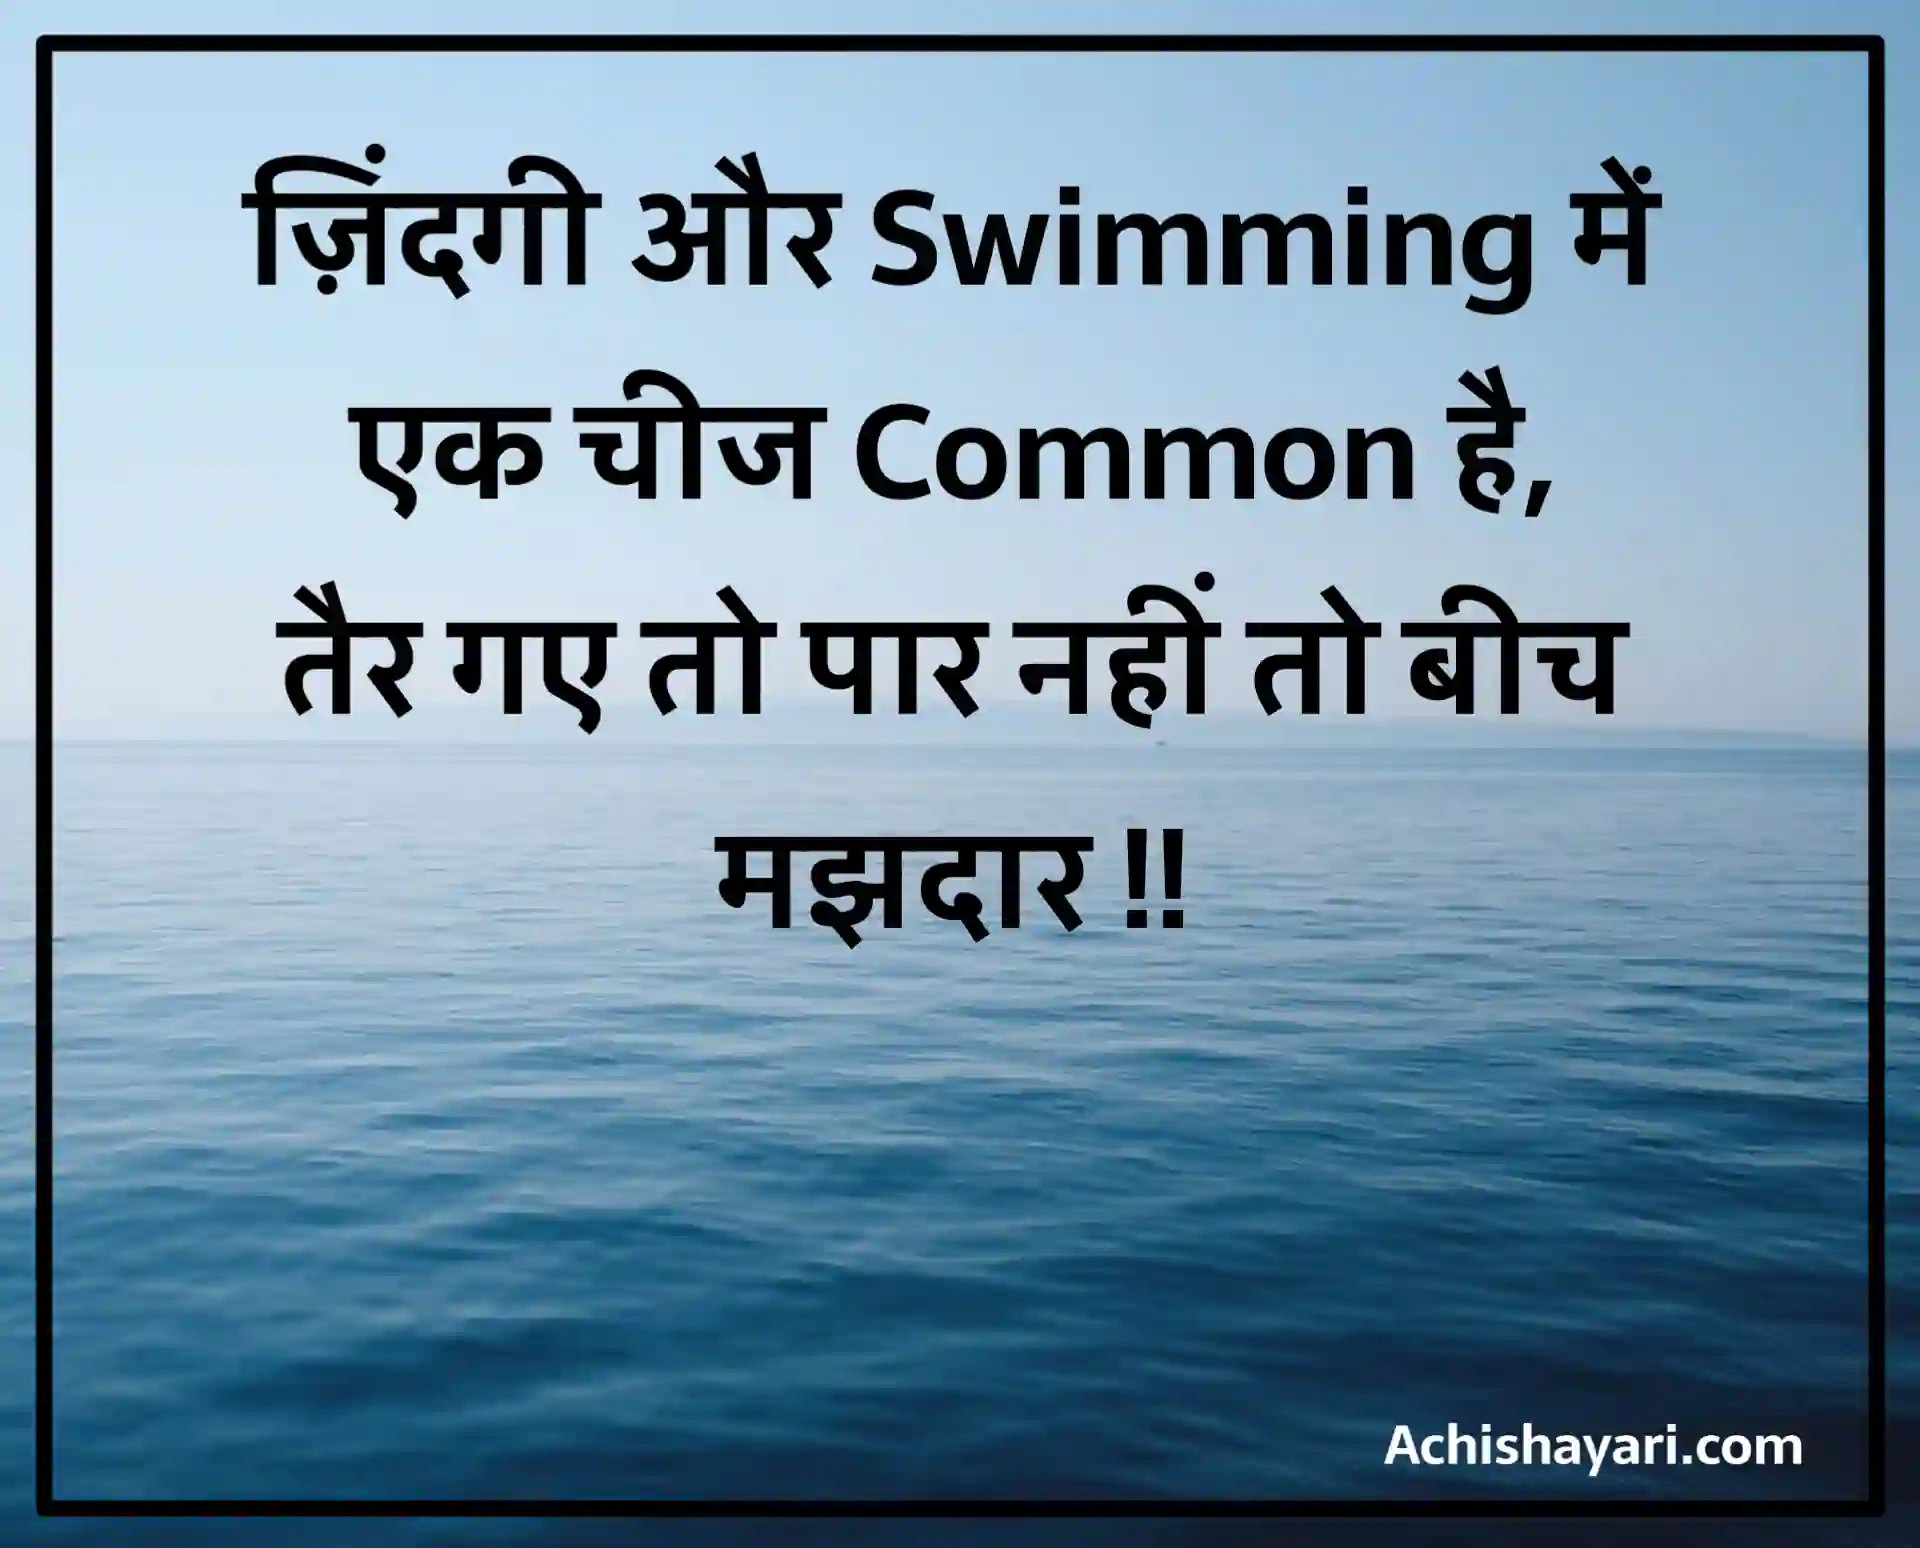 Life Quotes in Hindi Image